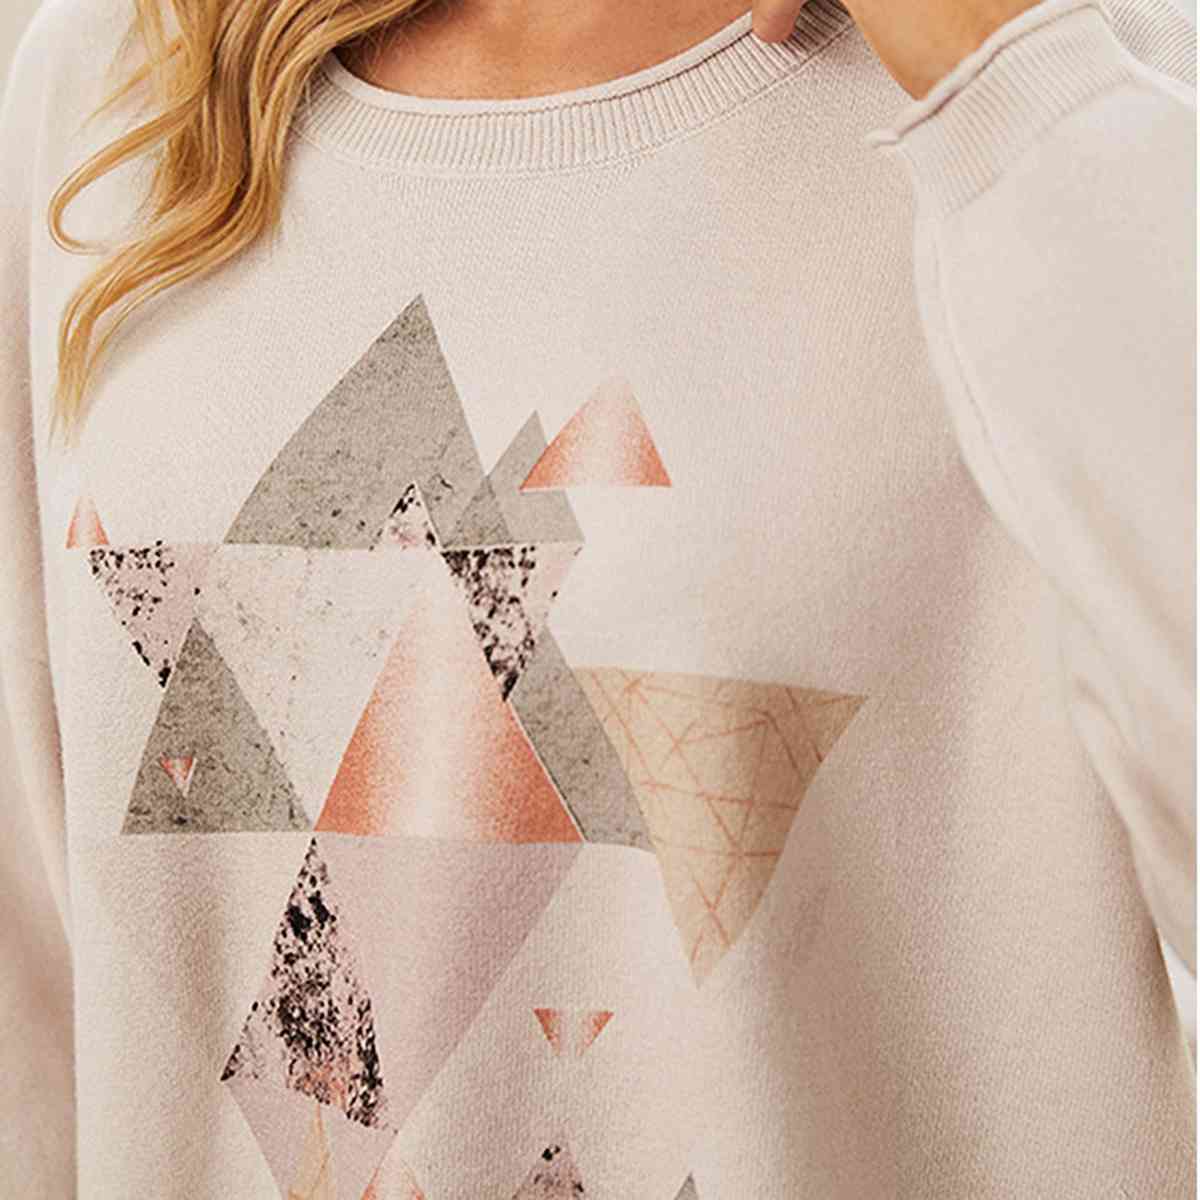 Geometric Graphic Dropped Shoulder Top - Women’s Clothing & Accessories - Shirts & Tops - 5 - 2024